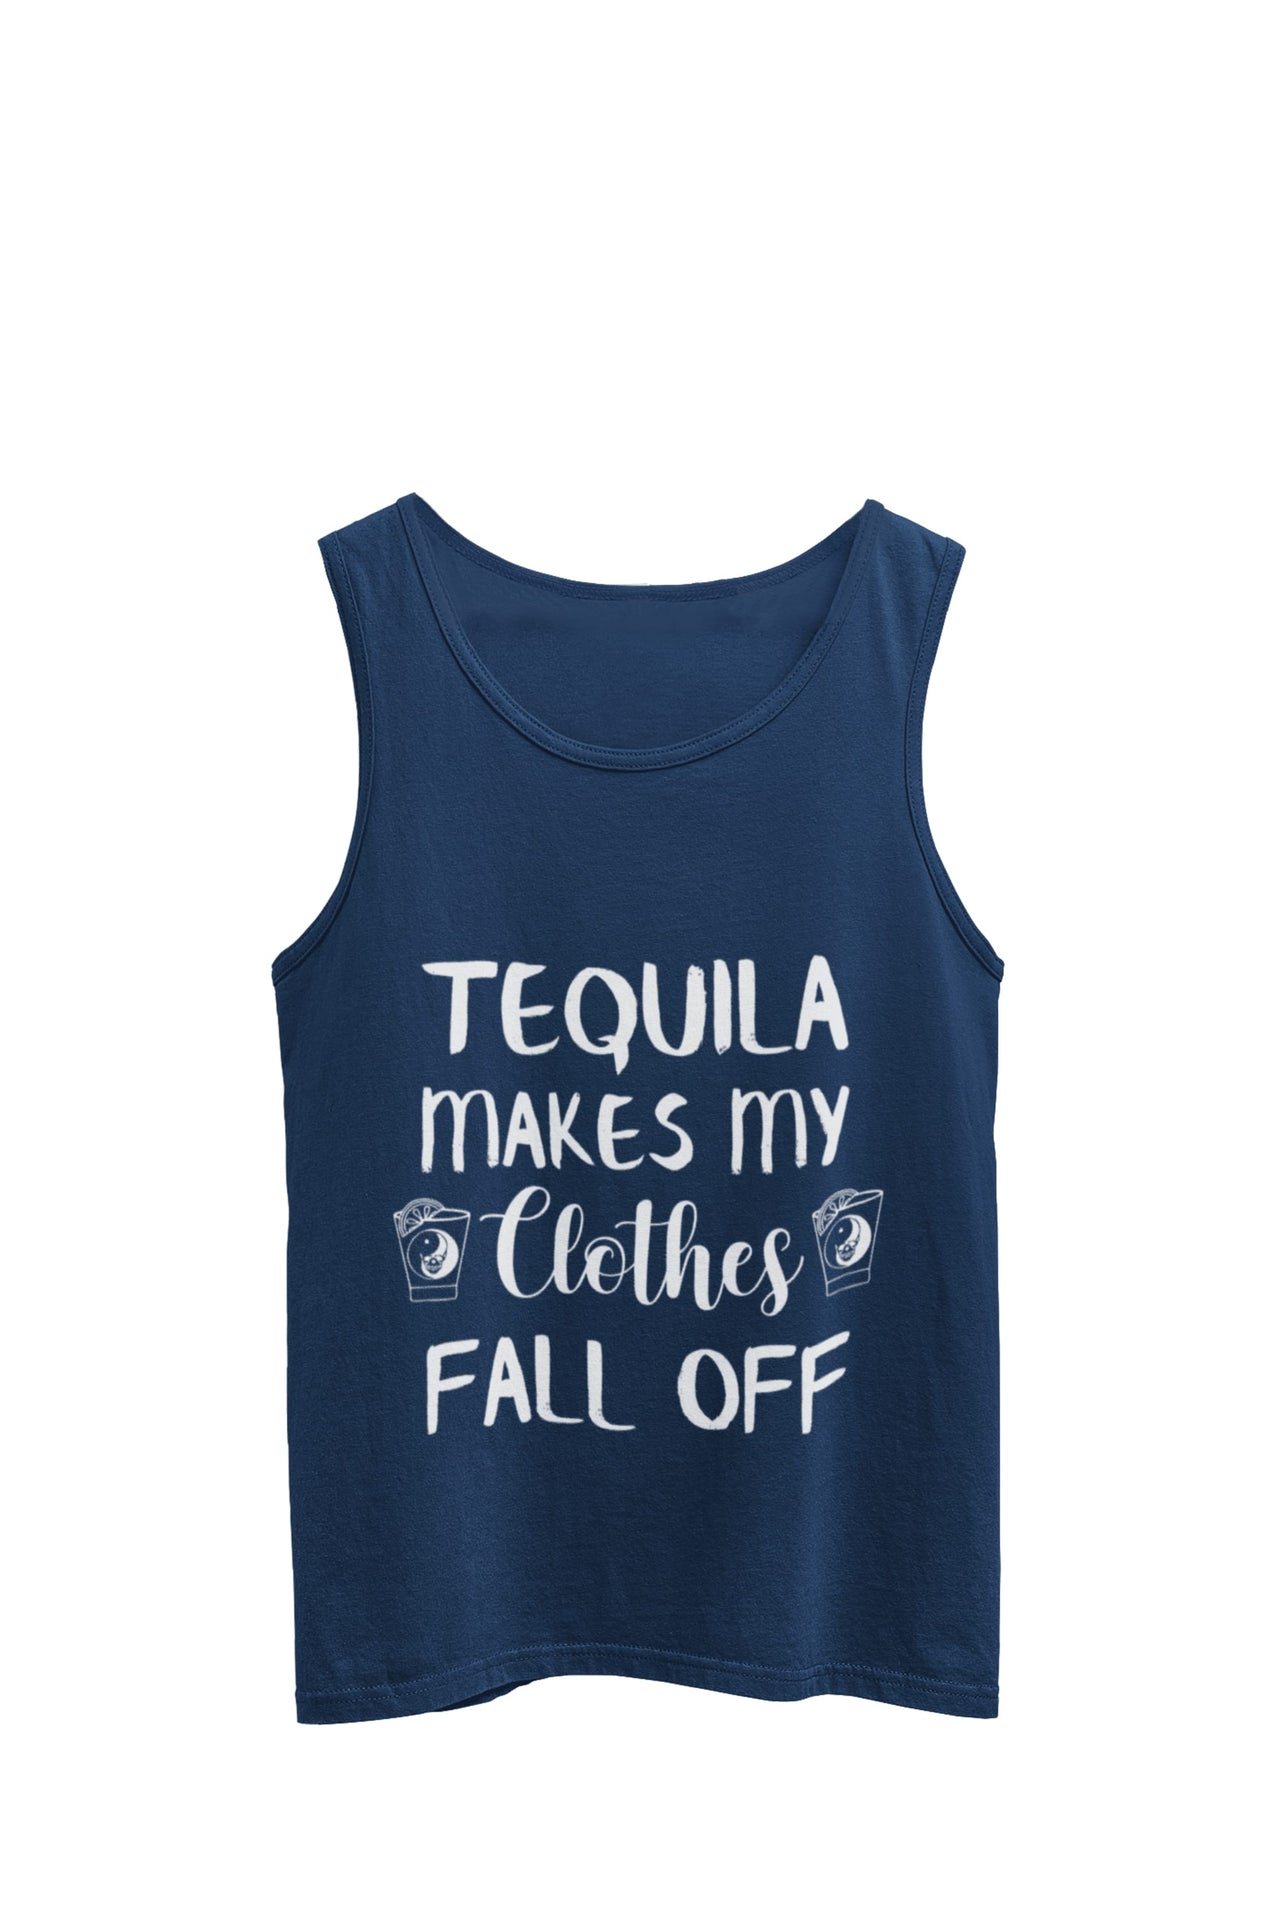  Navy Tank top featuring the text 'Tequila makes my clothes fall off,' accompanied by an image of a shot glass with a yin yang symbol on each side of the words. Designed by WooHoo Apparel.